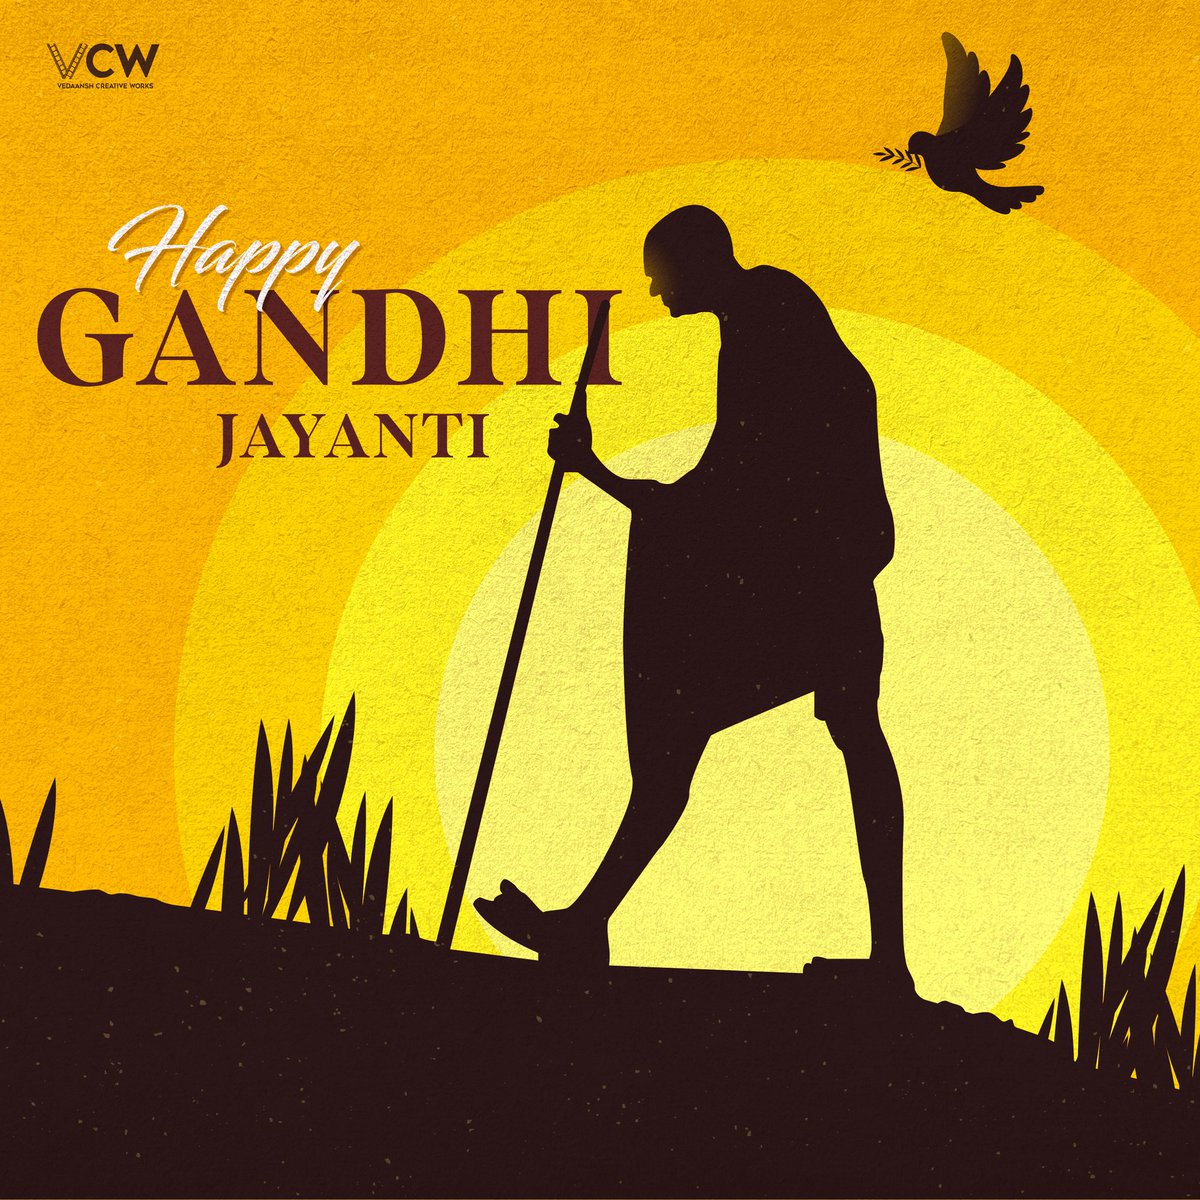 May the spirit of Gandhi guide our actions towards betterment and peace in the society 😇 Happy #GandhiJayanti ✨